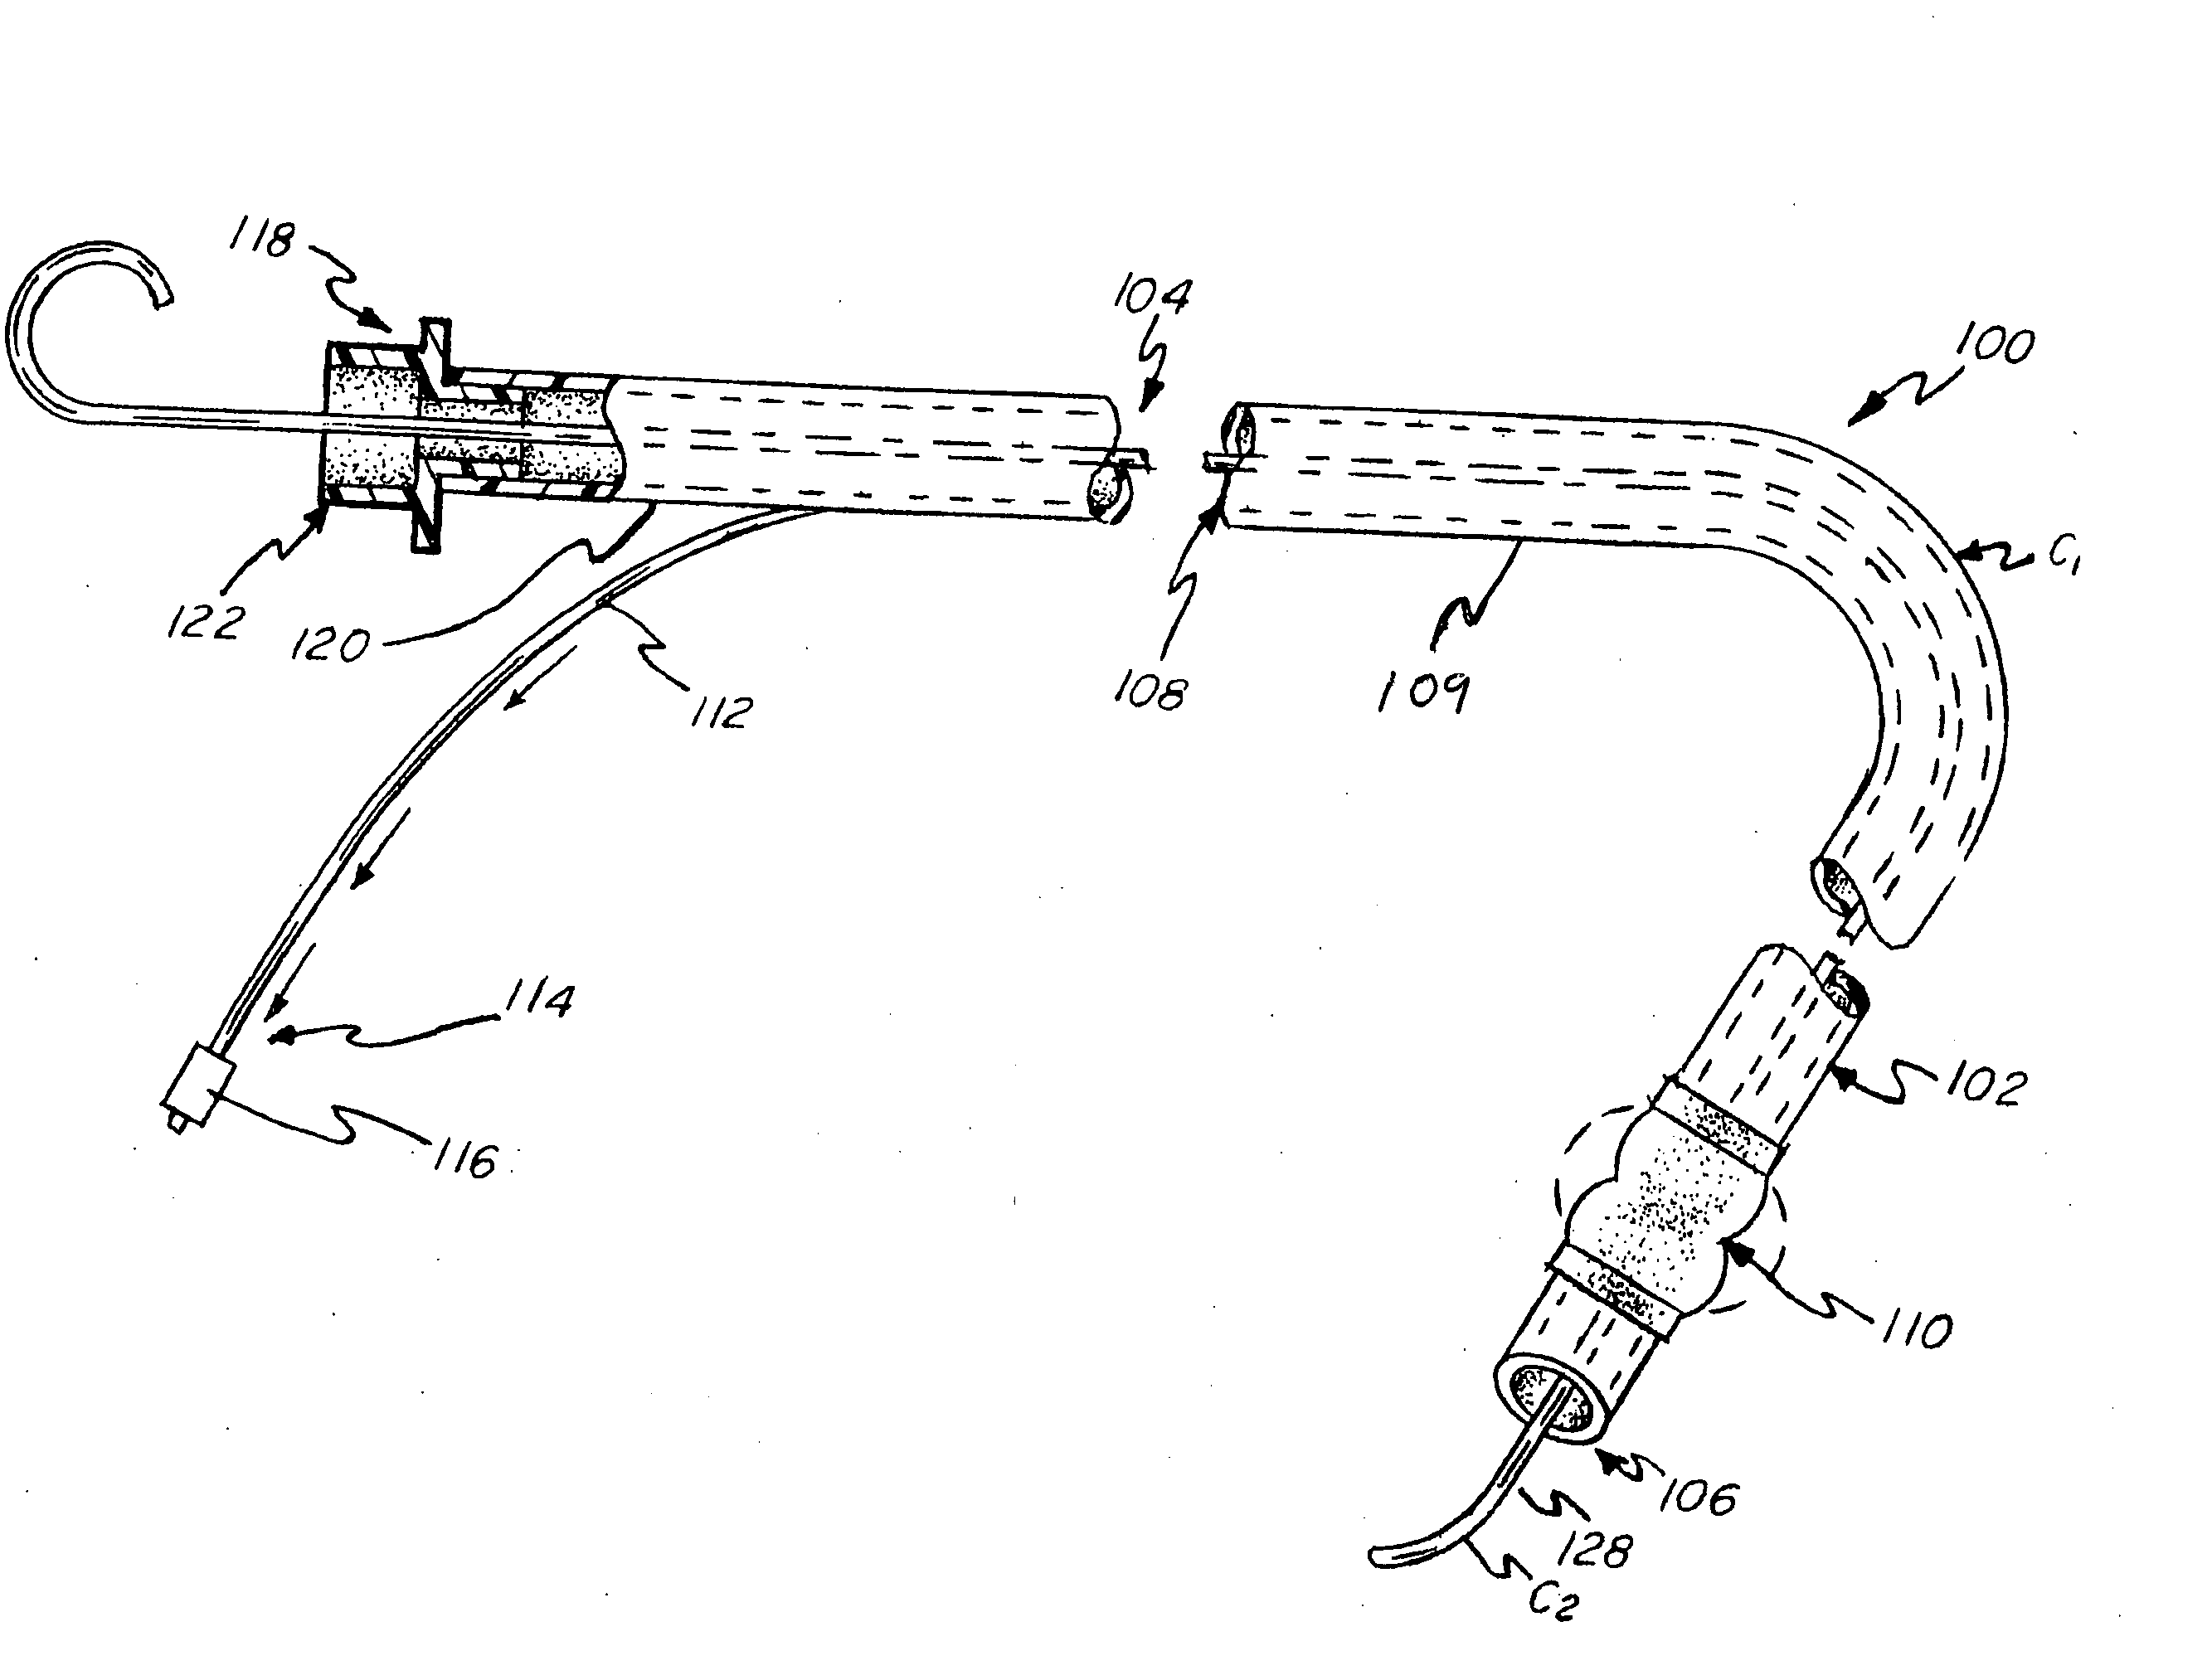 Intubation device and method of use